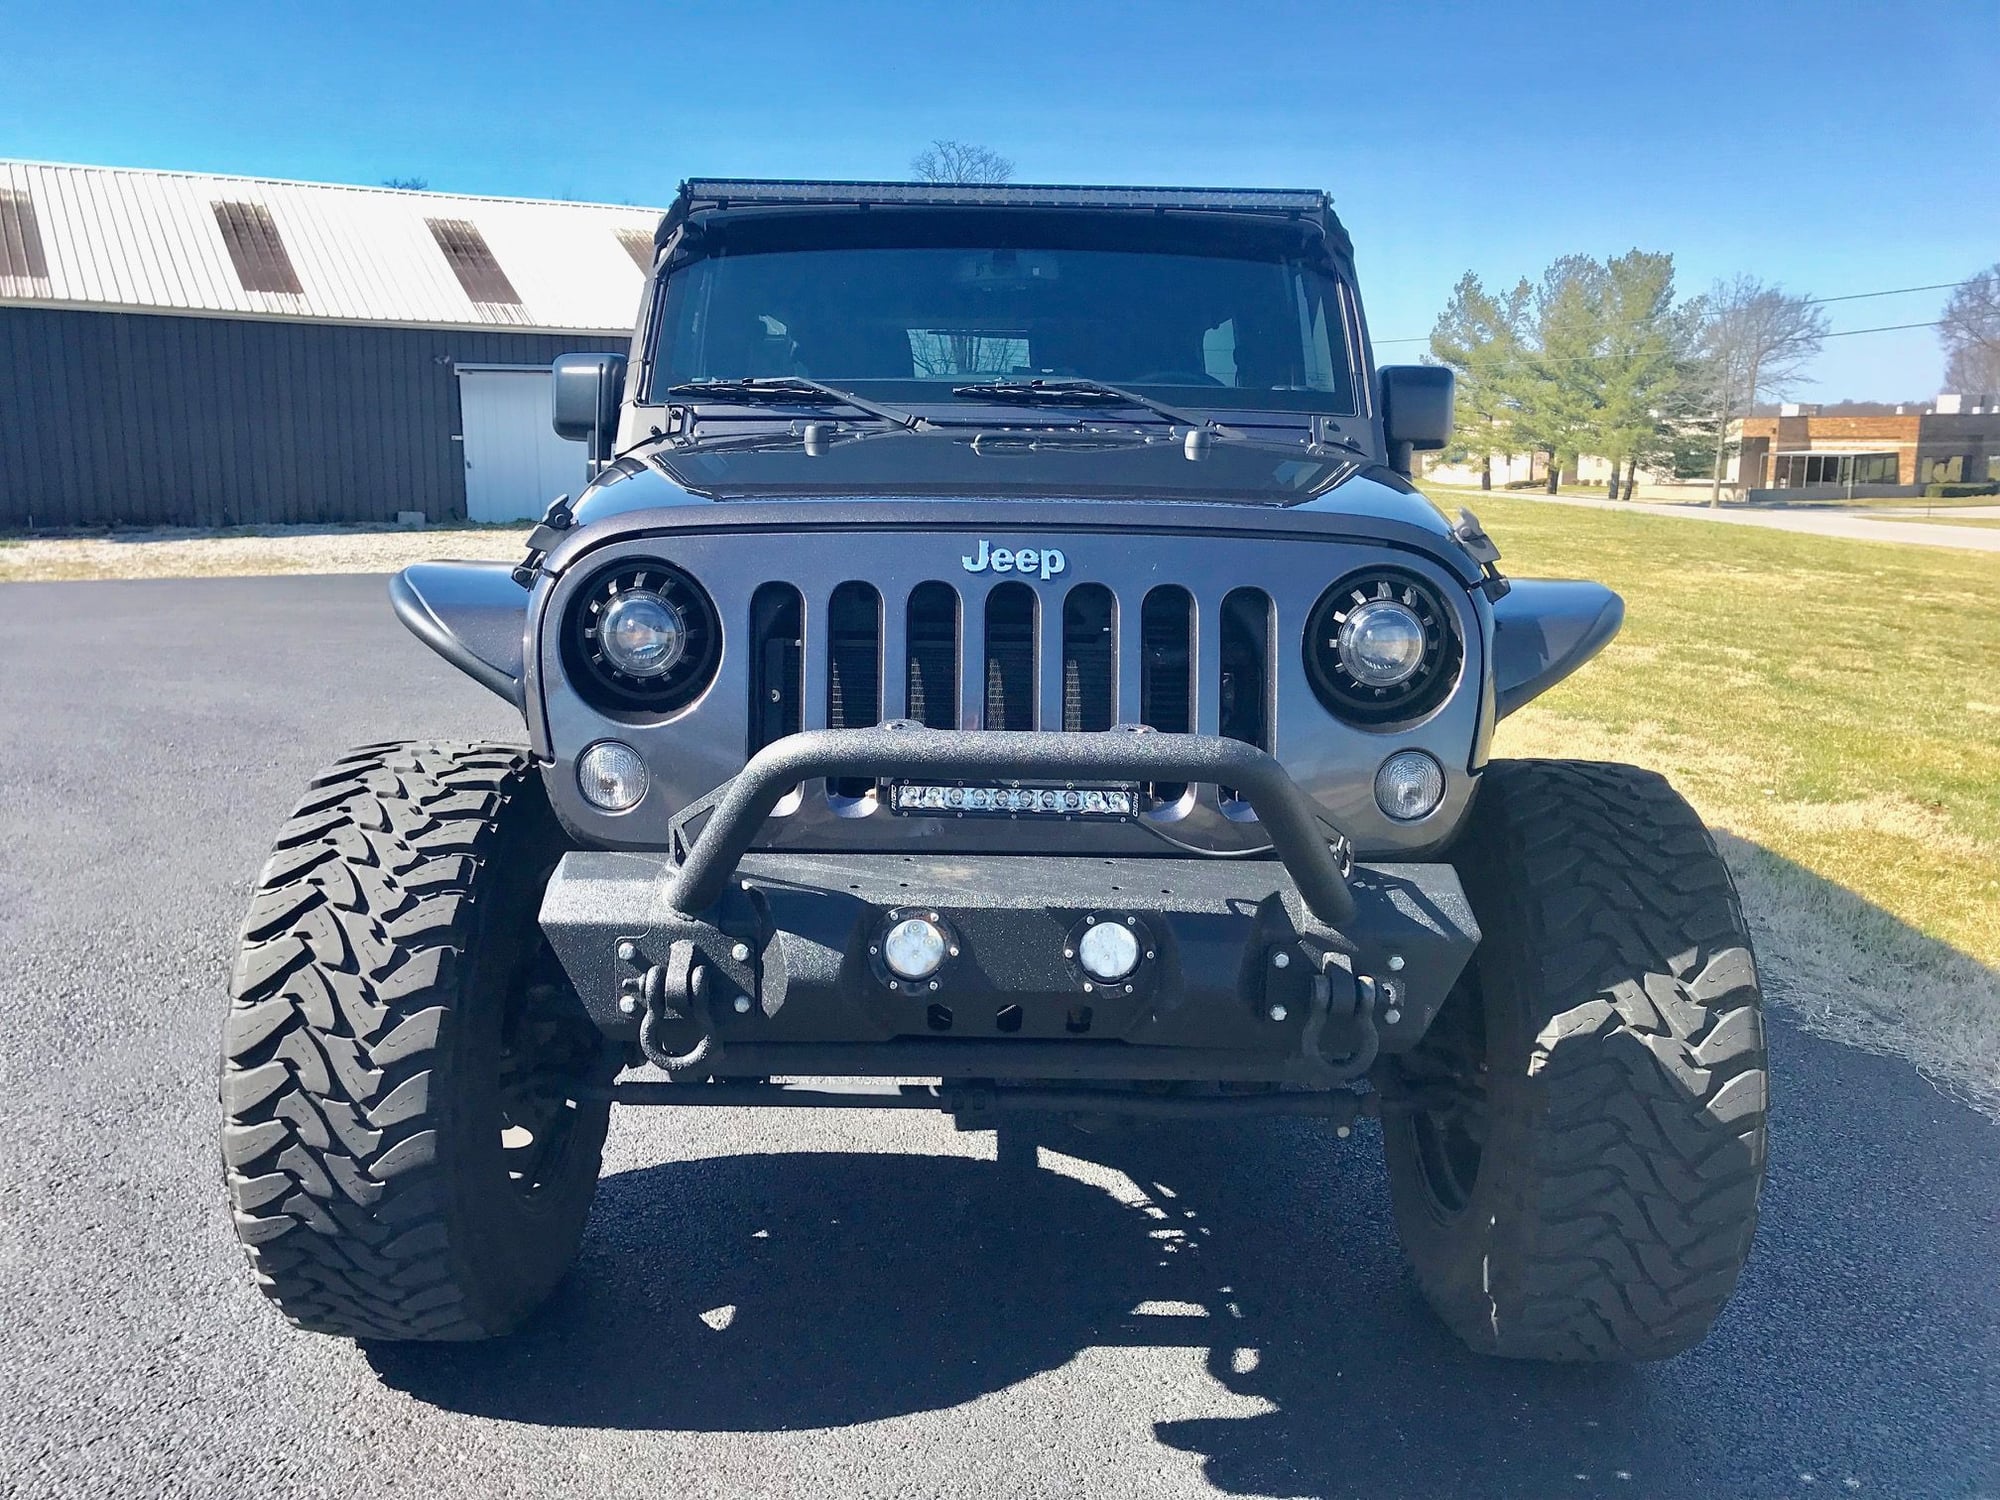 2016 Jeep Wrangler - 2016 Jeep Wrangler Rubicon - Supercharged - Used - VIN 1C4BJWFG4GL284125 - 37,800 Miles - 6 cyl - 4WD - Automatic - SUV - Gray - Harrodsburg, KY 40330, United States